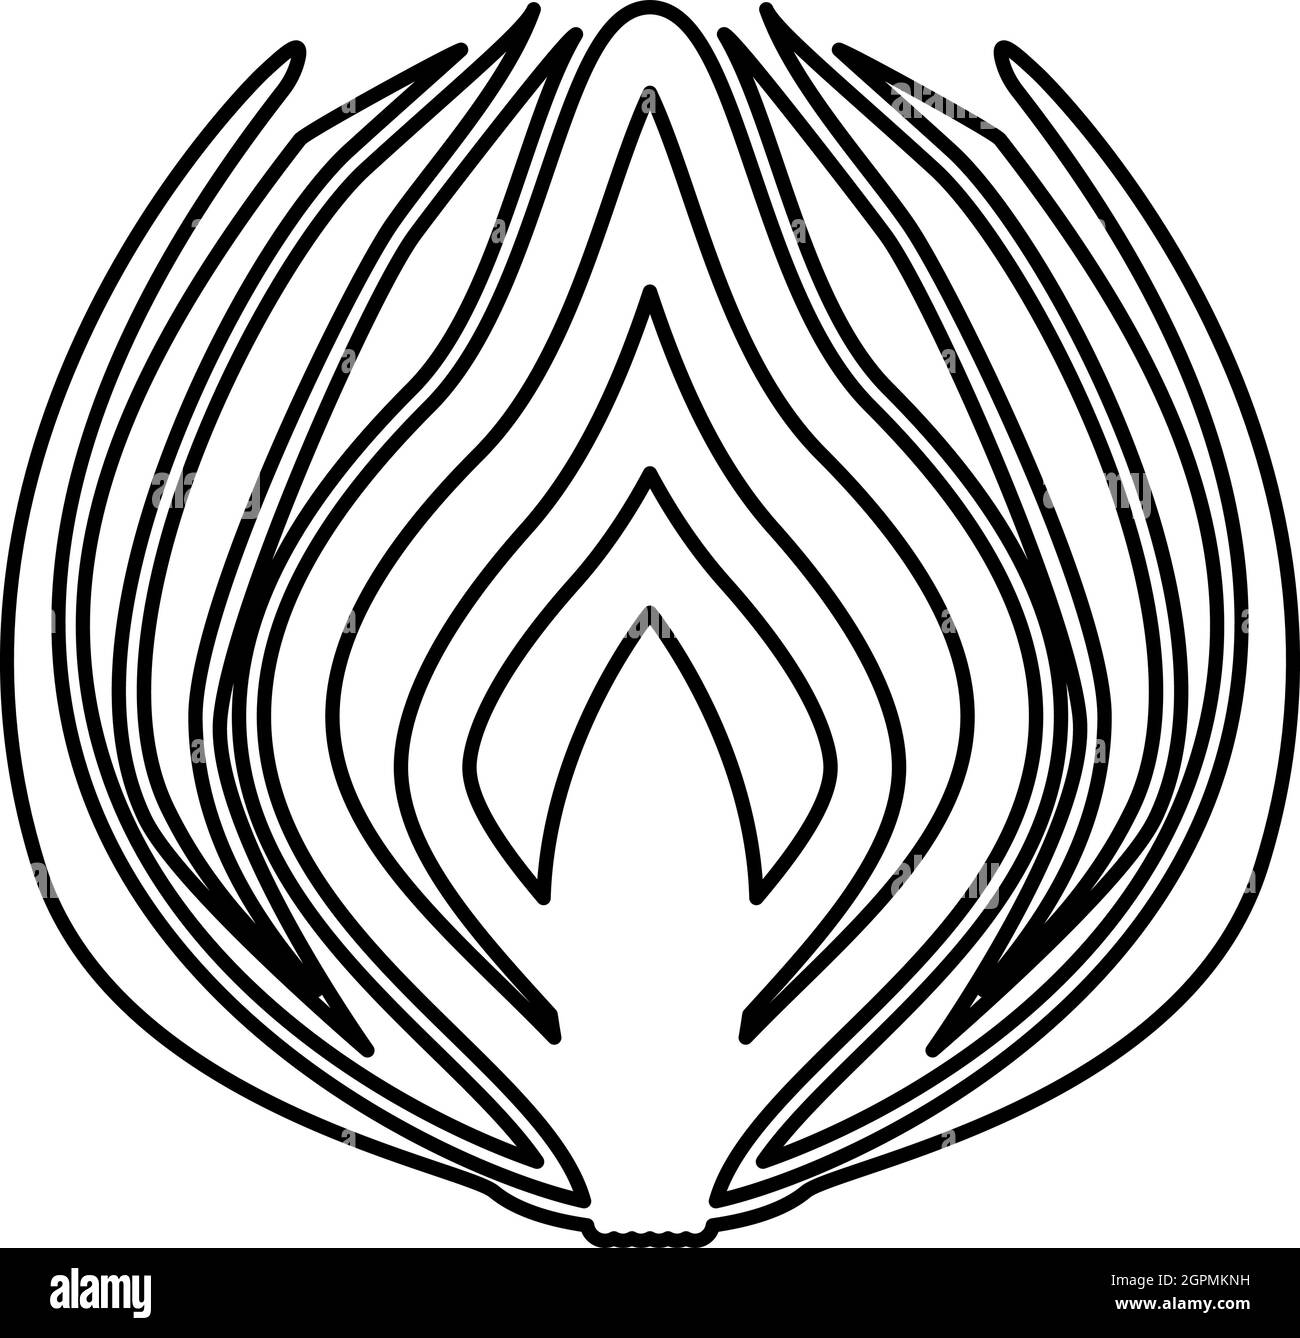 Onion cut in half part Bulbs chopped sliced vegetable contour outline black color vector illustration flat style image Stock Vector